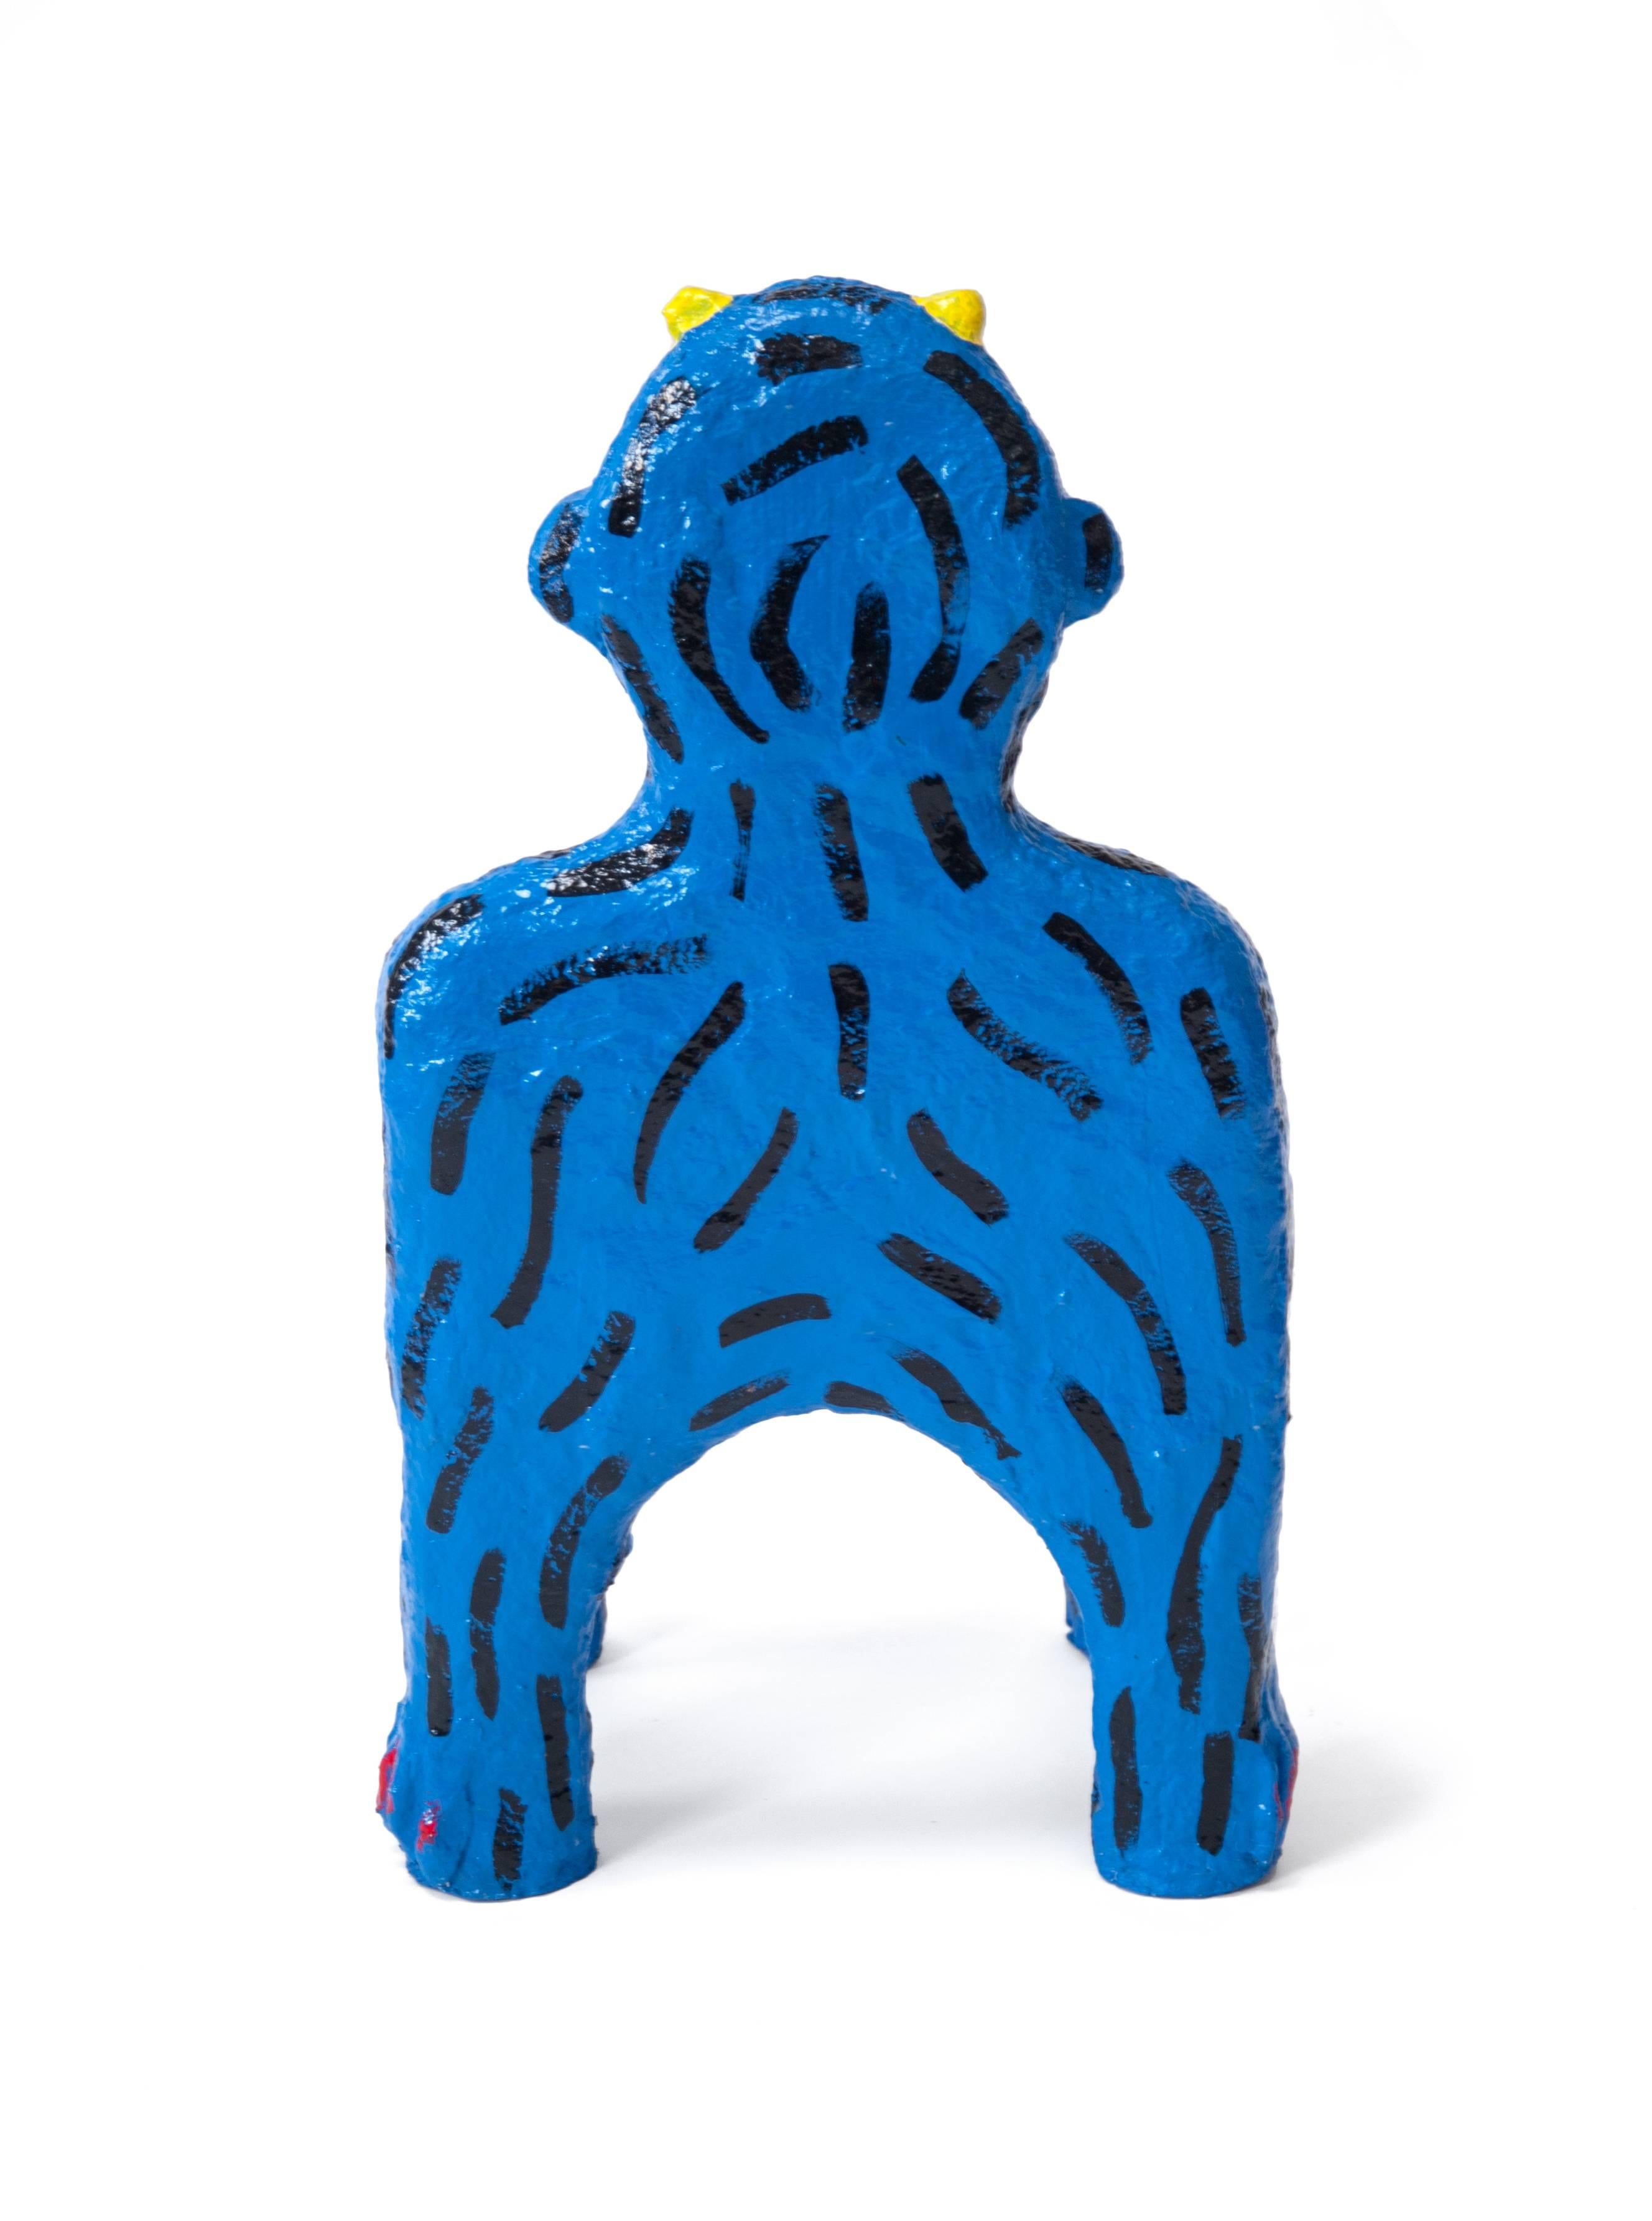 Blue Creature Child Chair by Brett Douglas Hunter, USA, 2018 In Excellent Condition For Sale In New York, NY